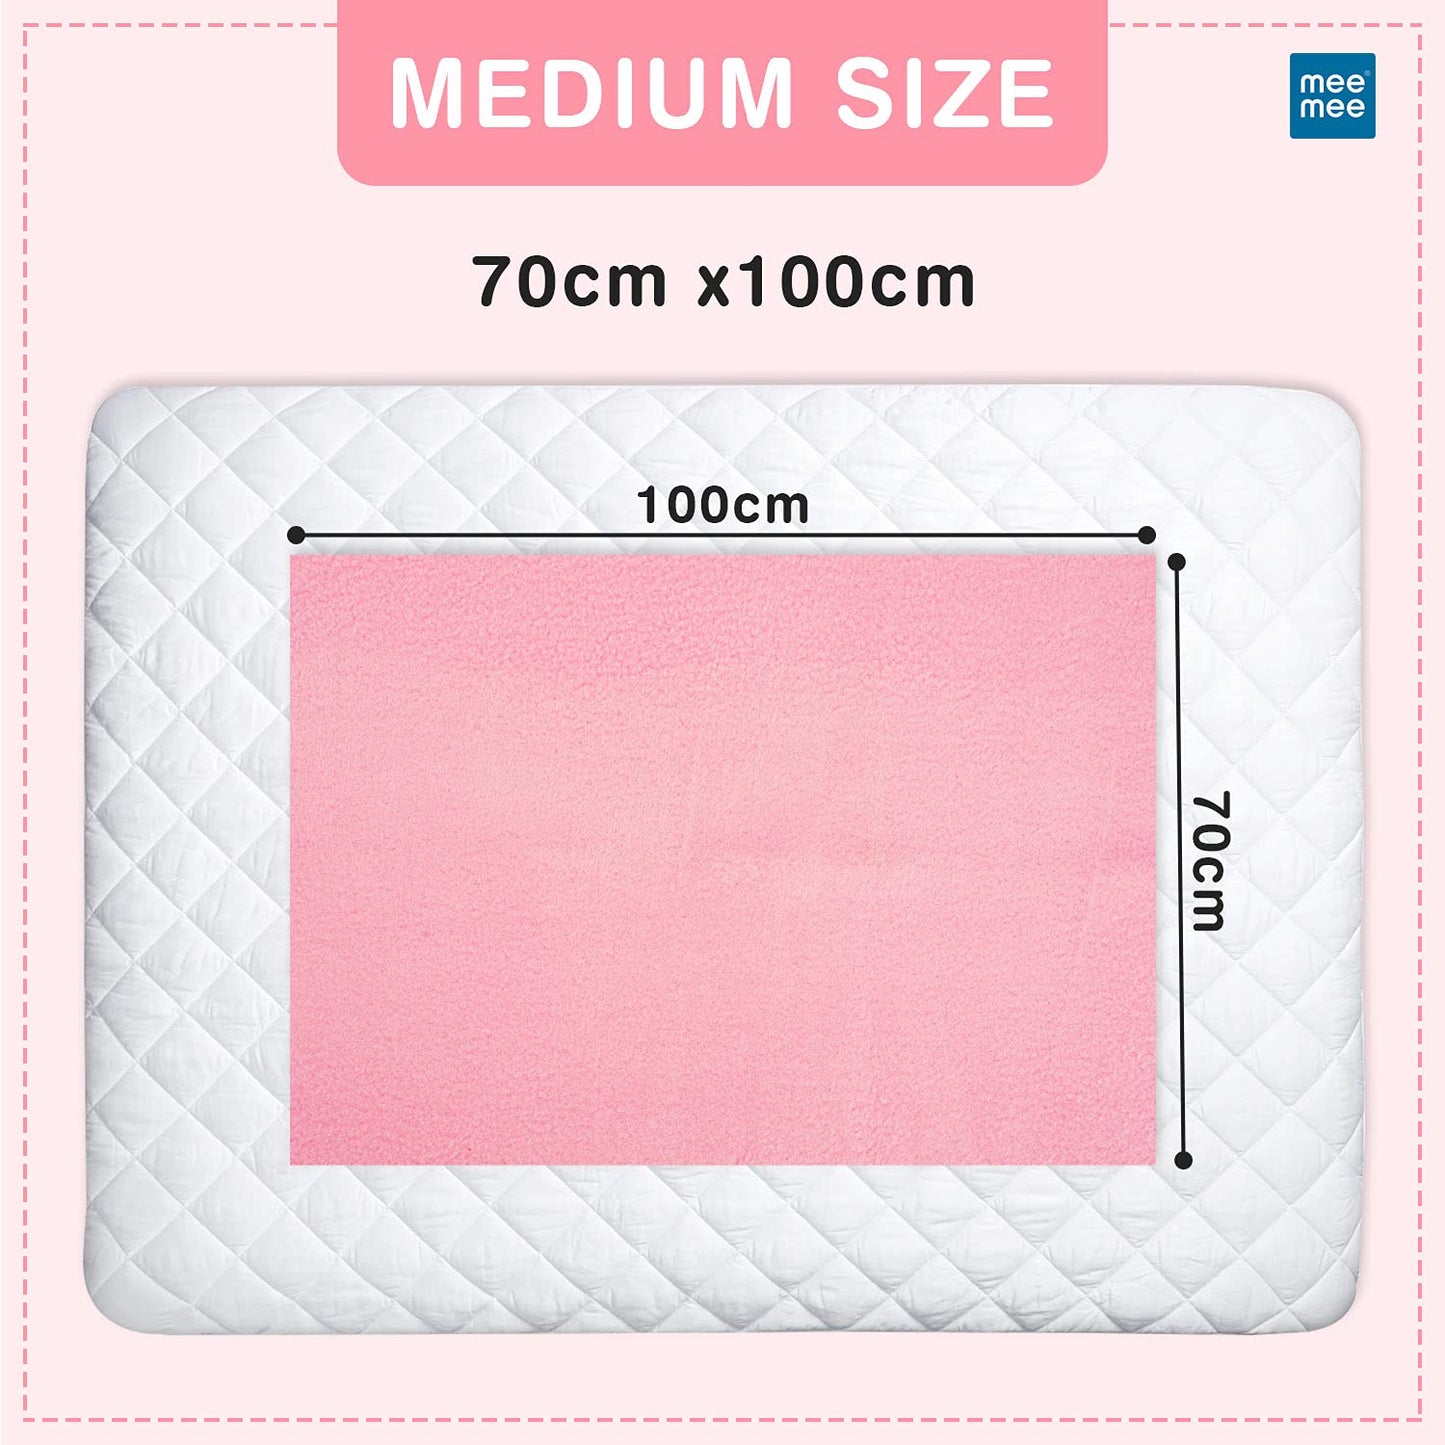 Mee Mee Reusable Water Proof/Extra Absorbent Cotton Mat/Dry Sheets(Pink,Small)